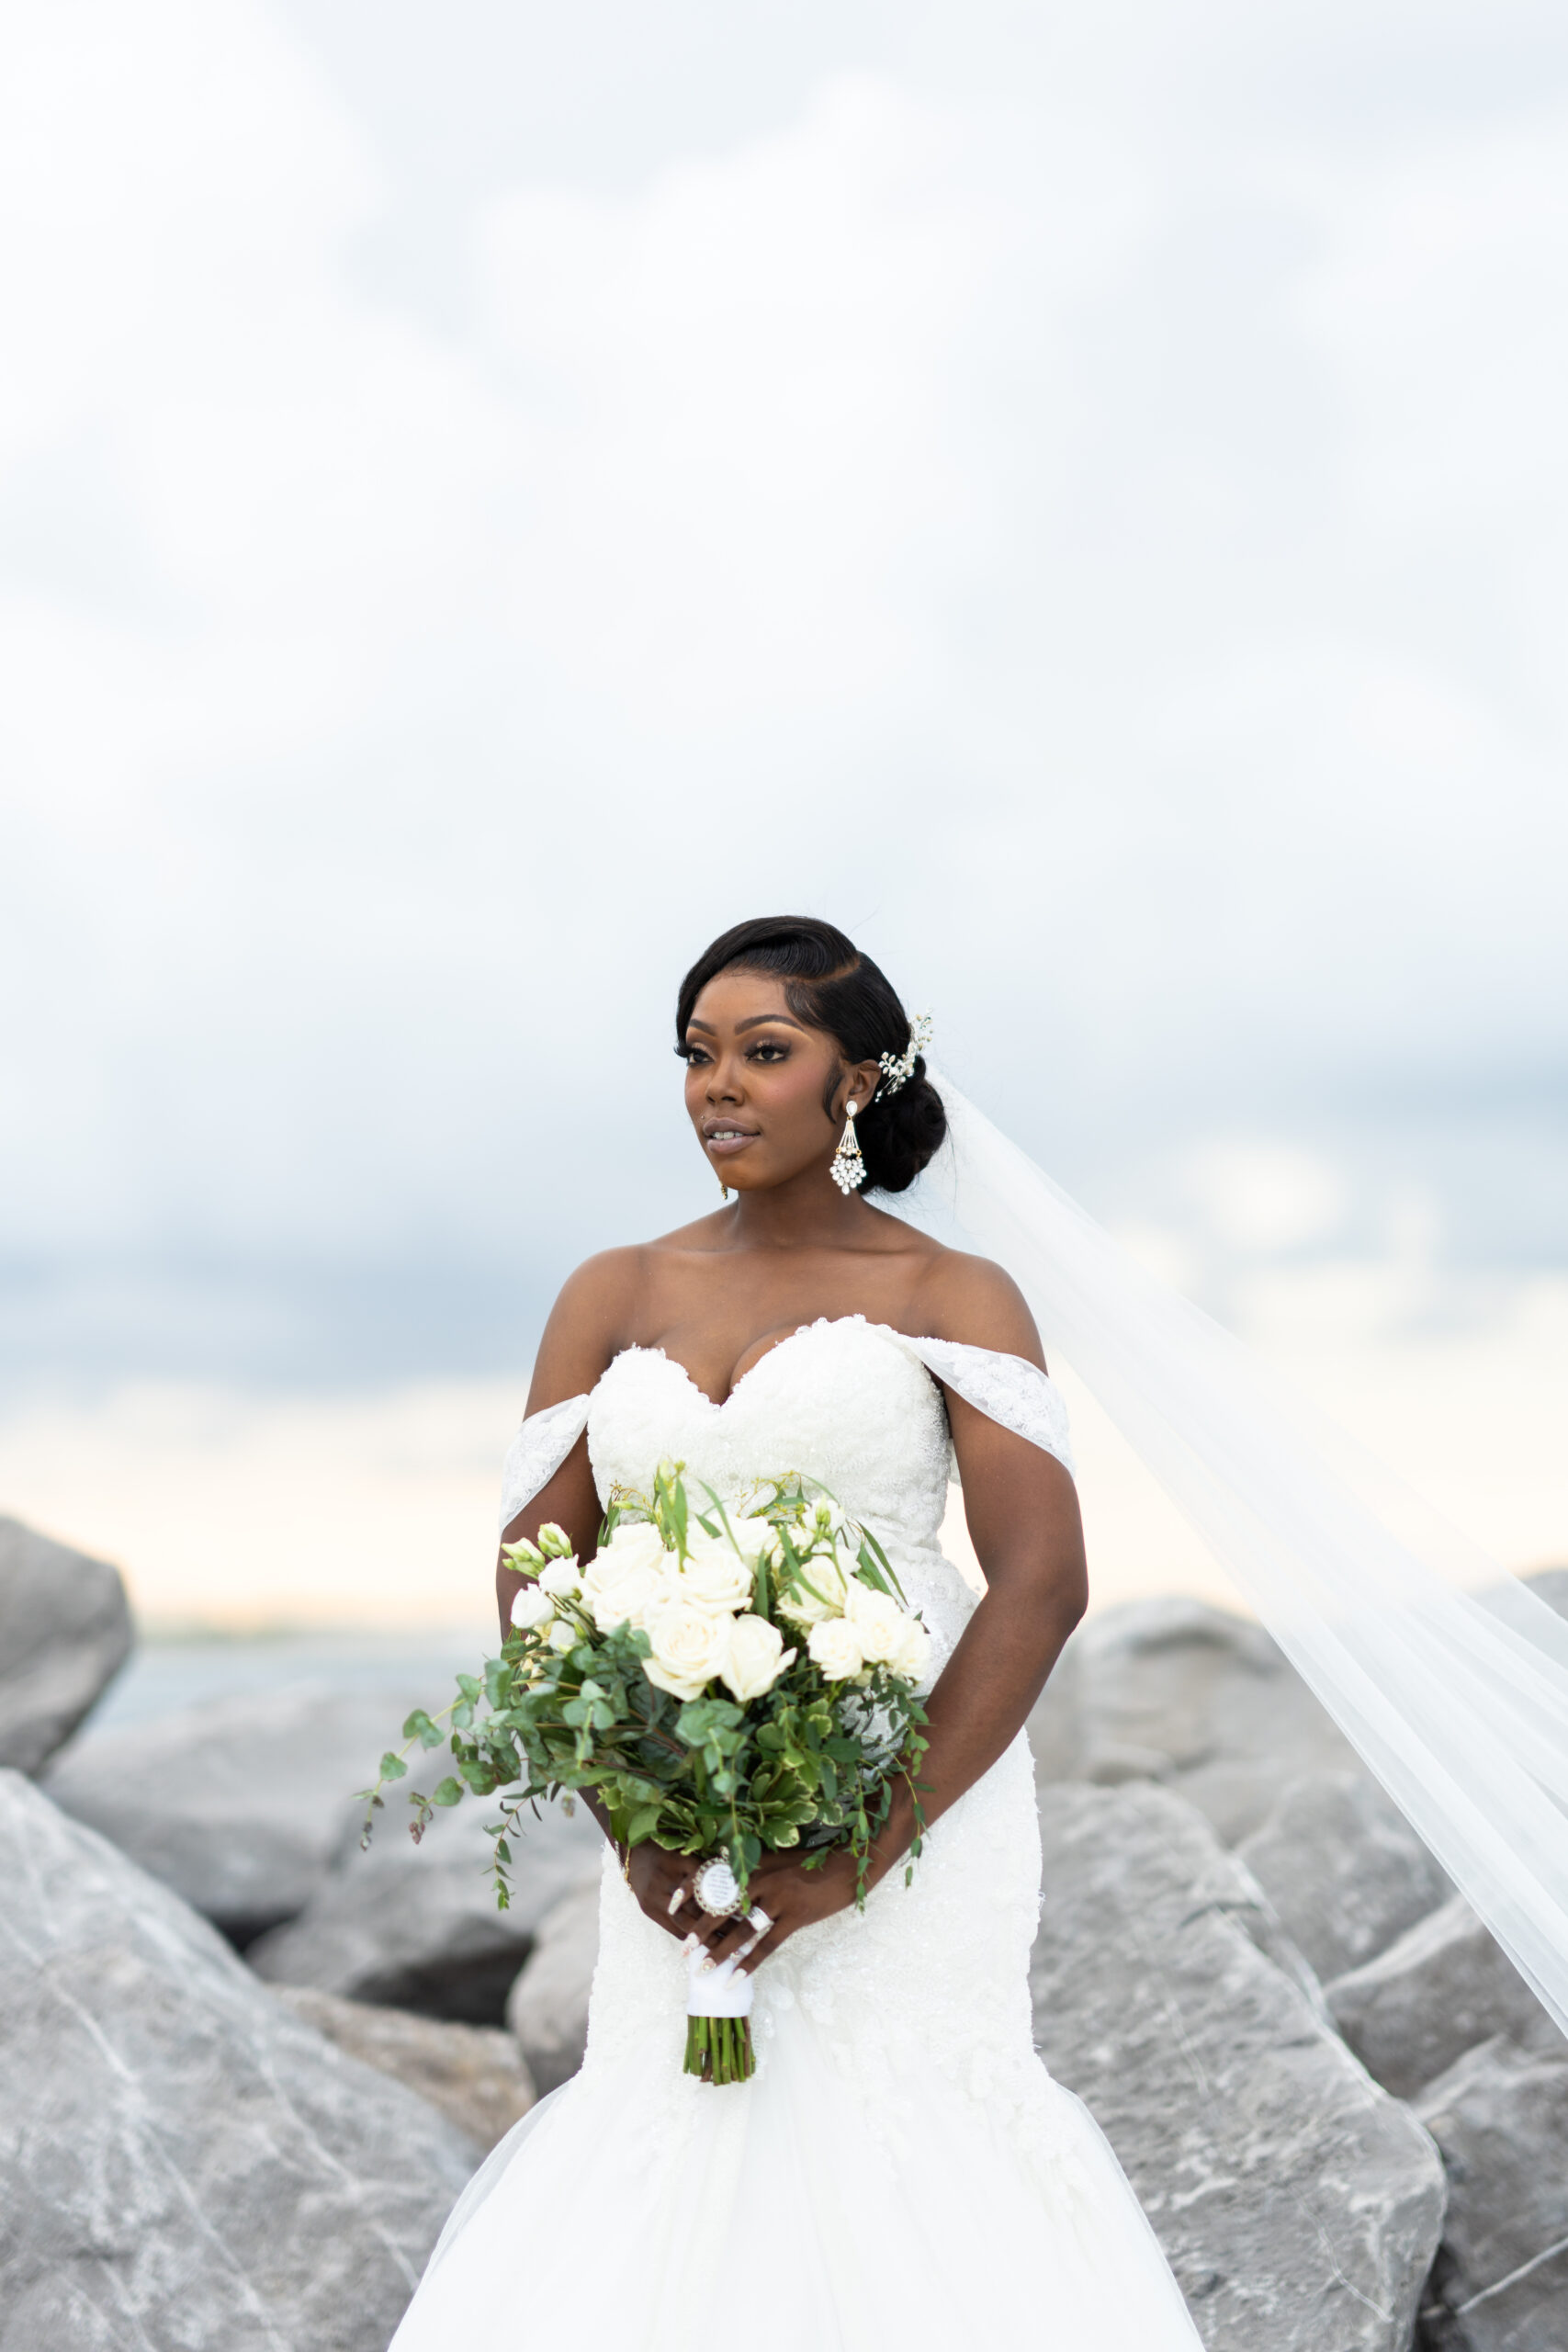 A Guide to Wedding Photography in Destin